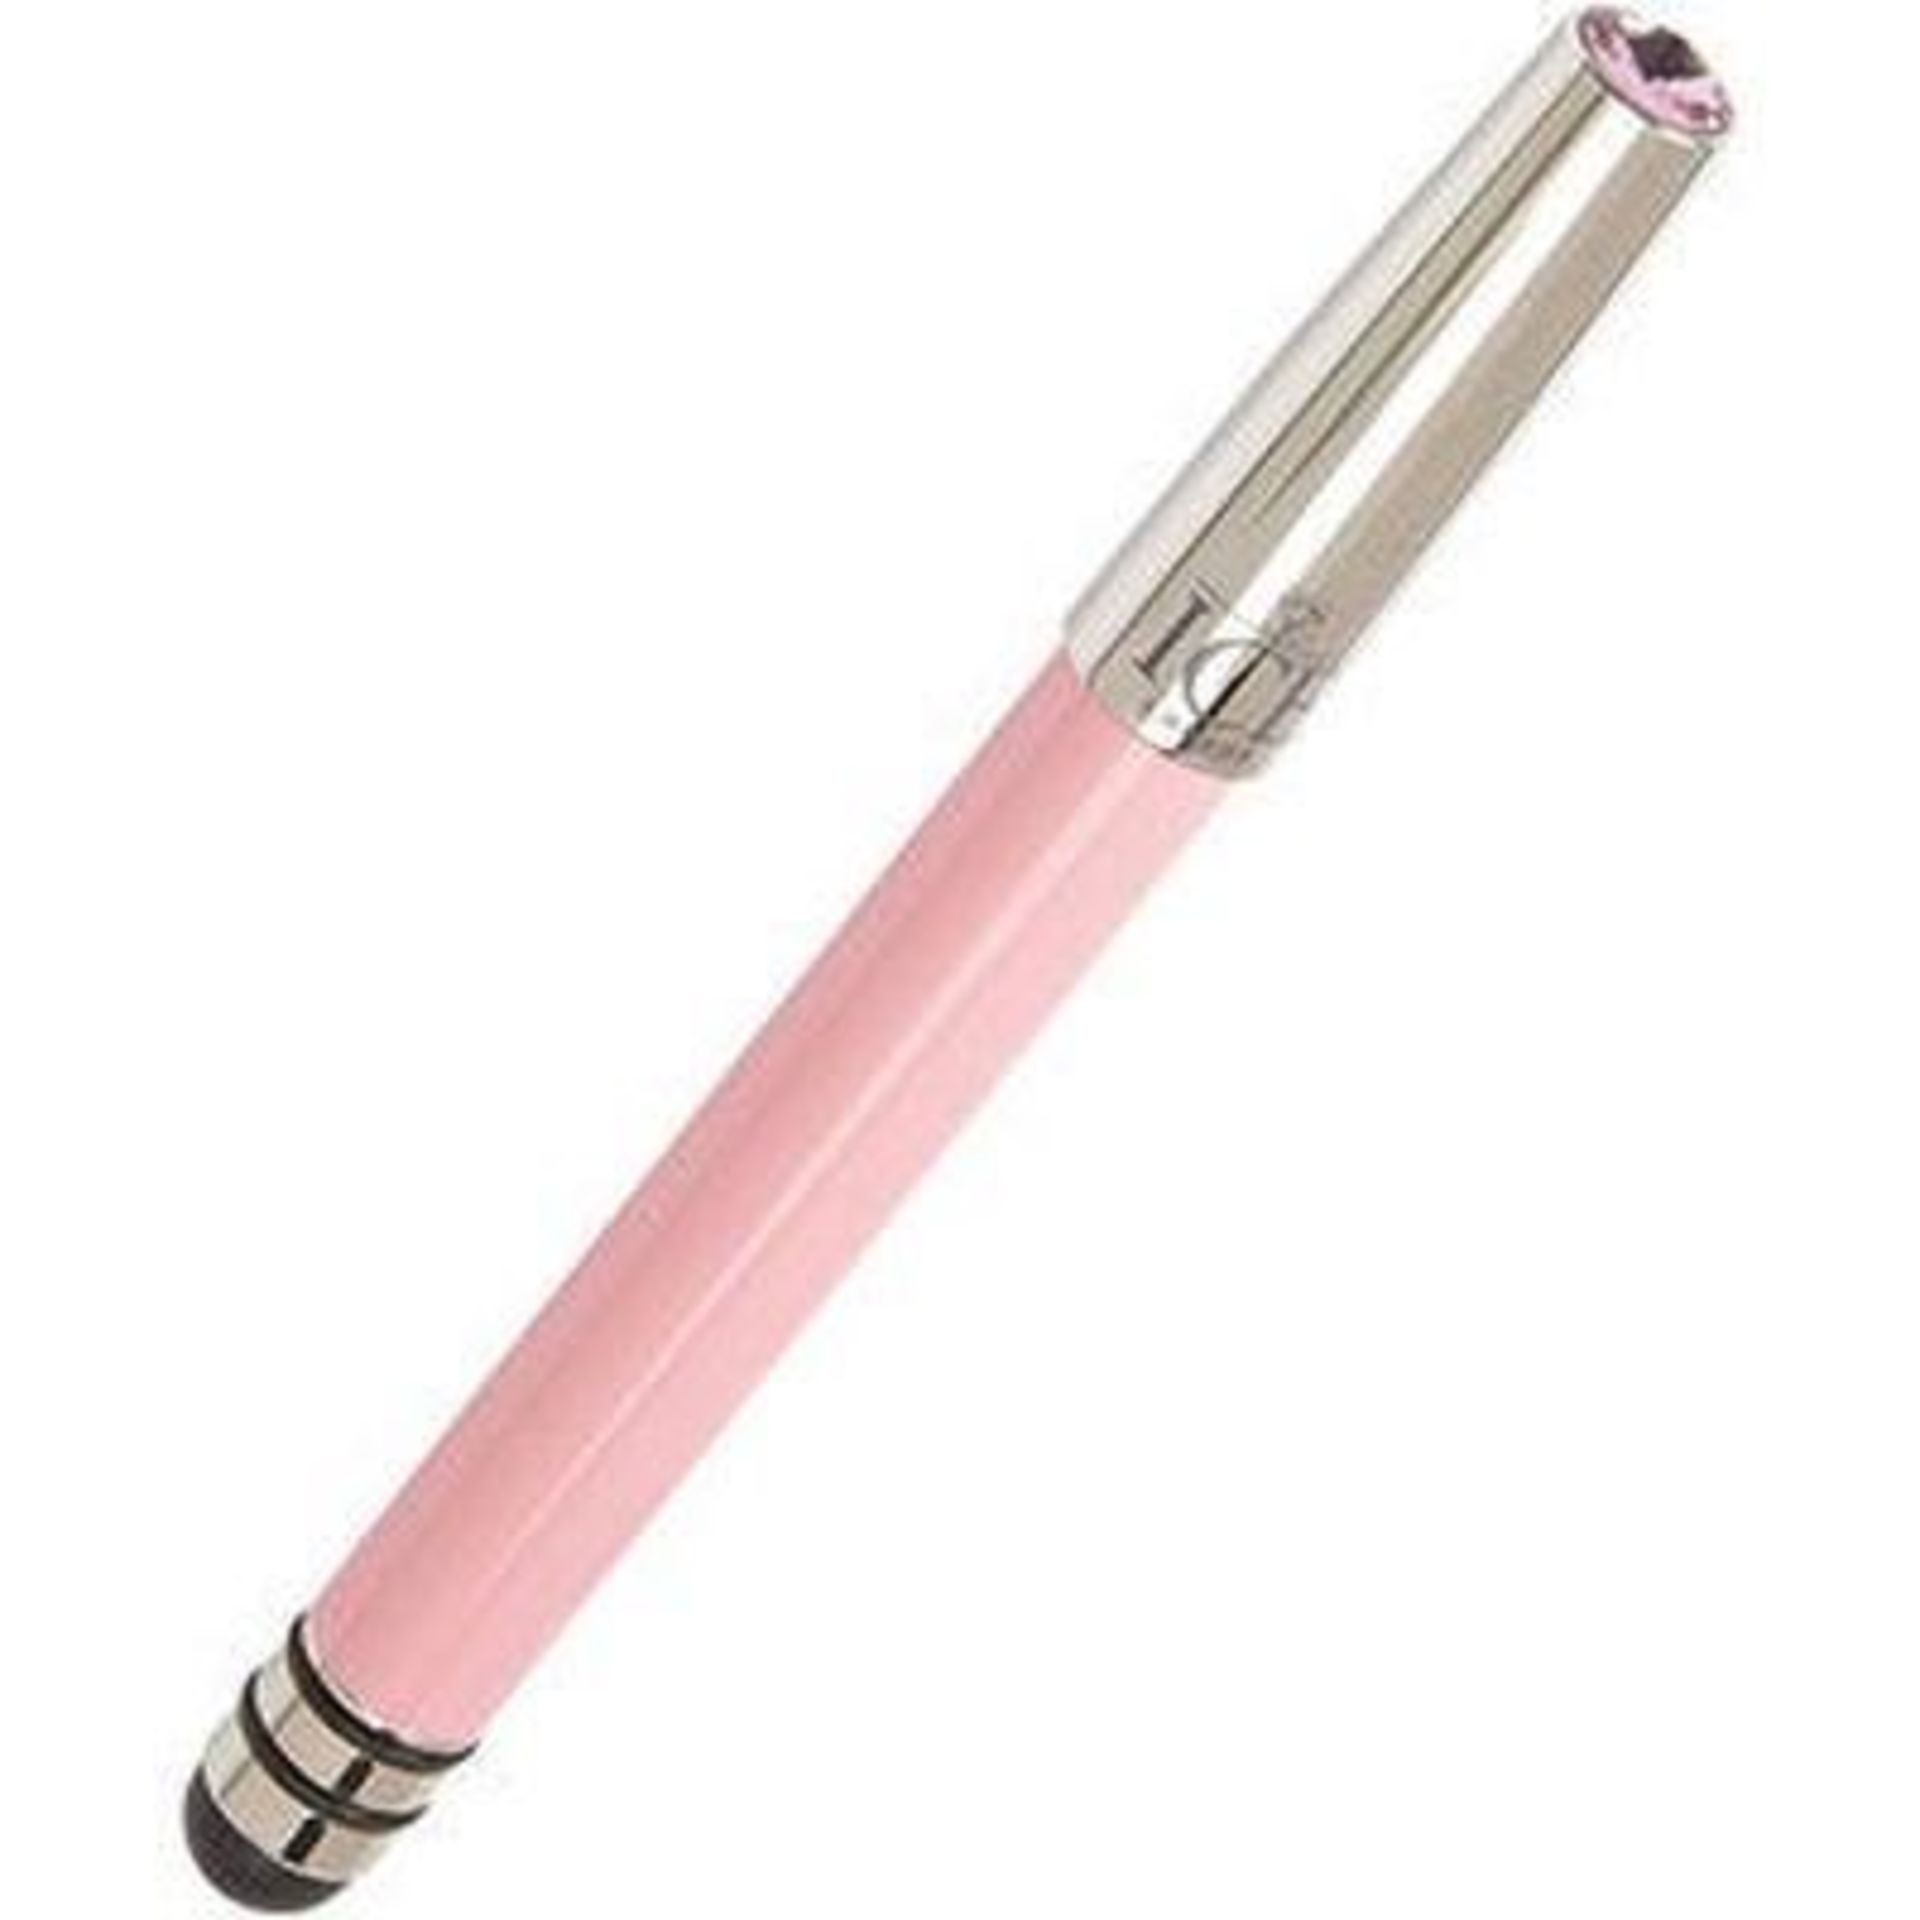 10 x ICE LONDON App Pen Duo - Touch Stylus And Ink Pen Combined - Colour: LIGHT PINK - MADE WITH - Image 3 of 6